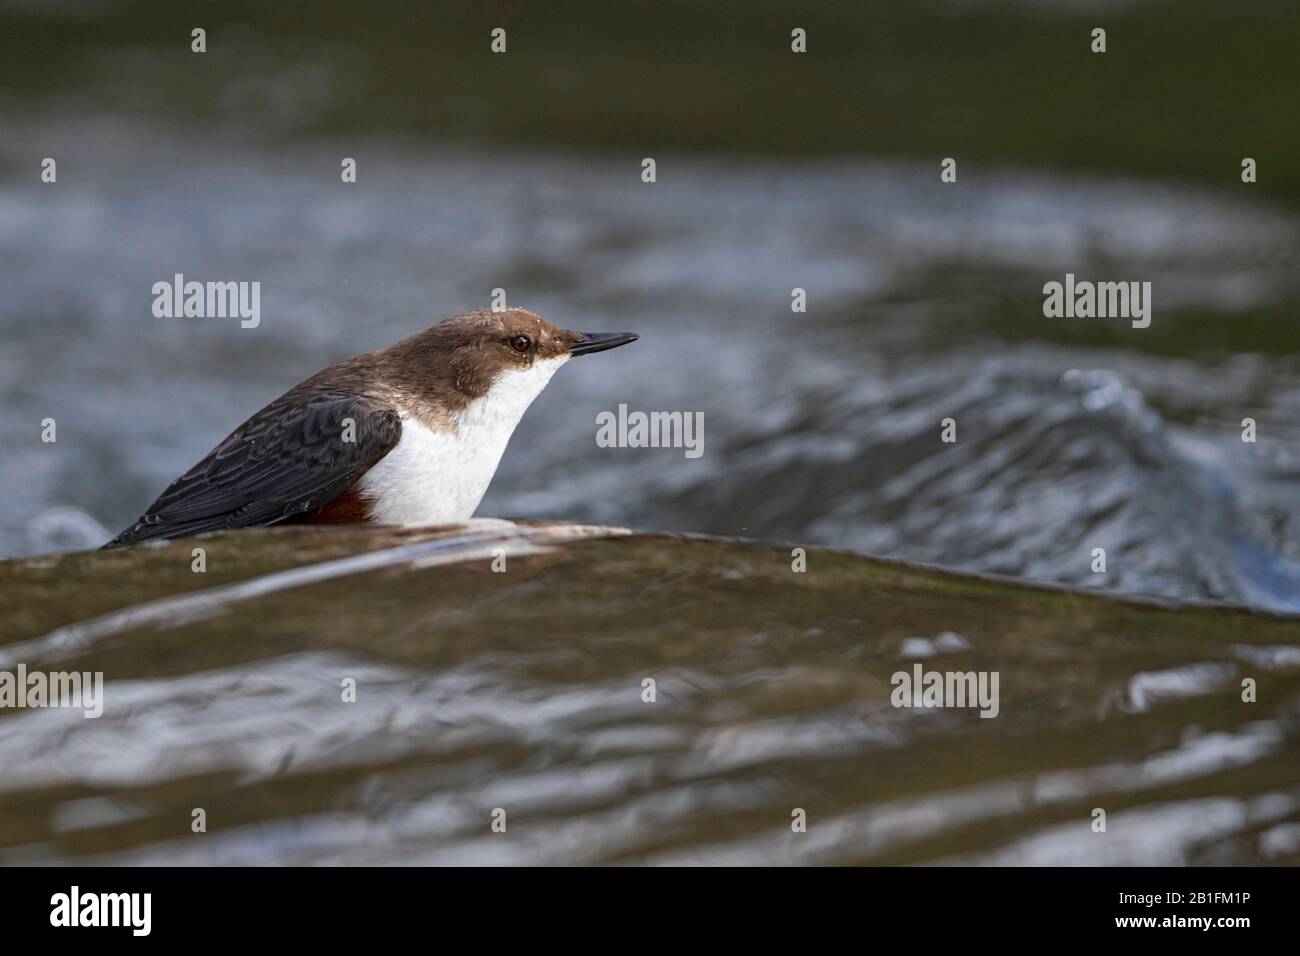 A White-throated Dipper (Cinclus cinclus) at ariver Stock Photo